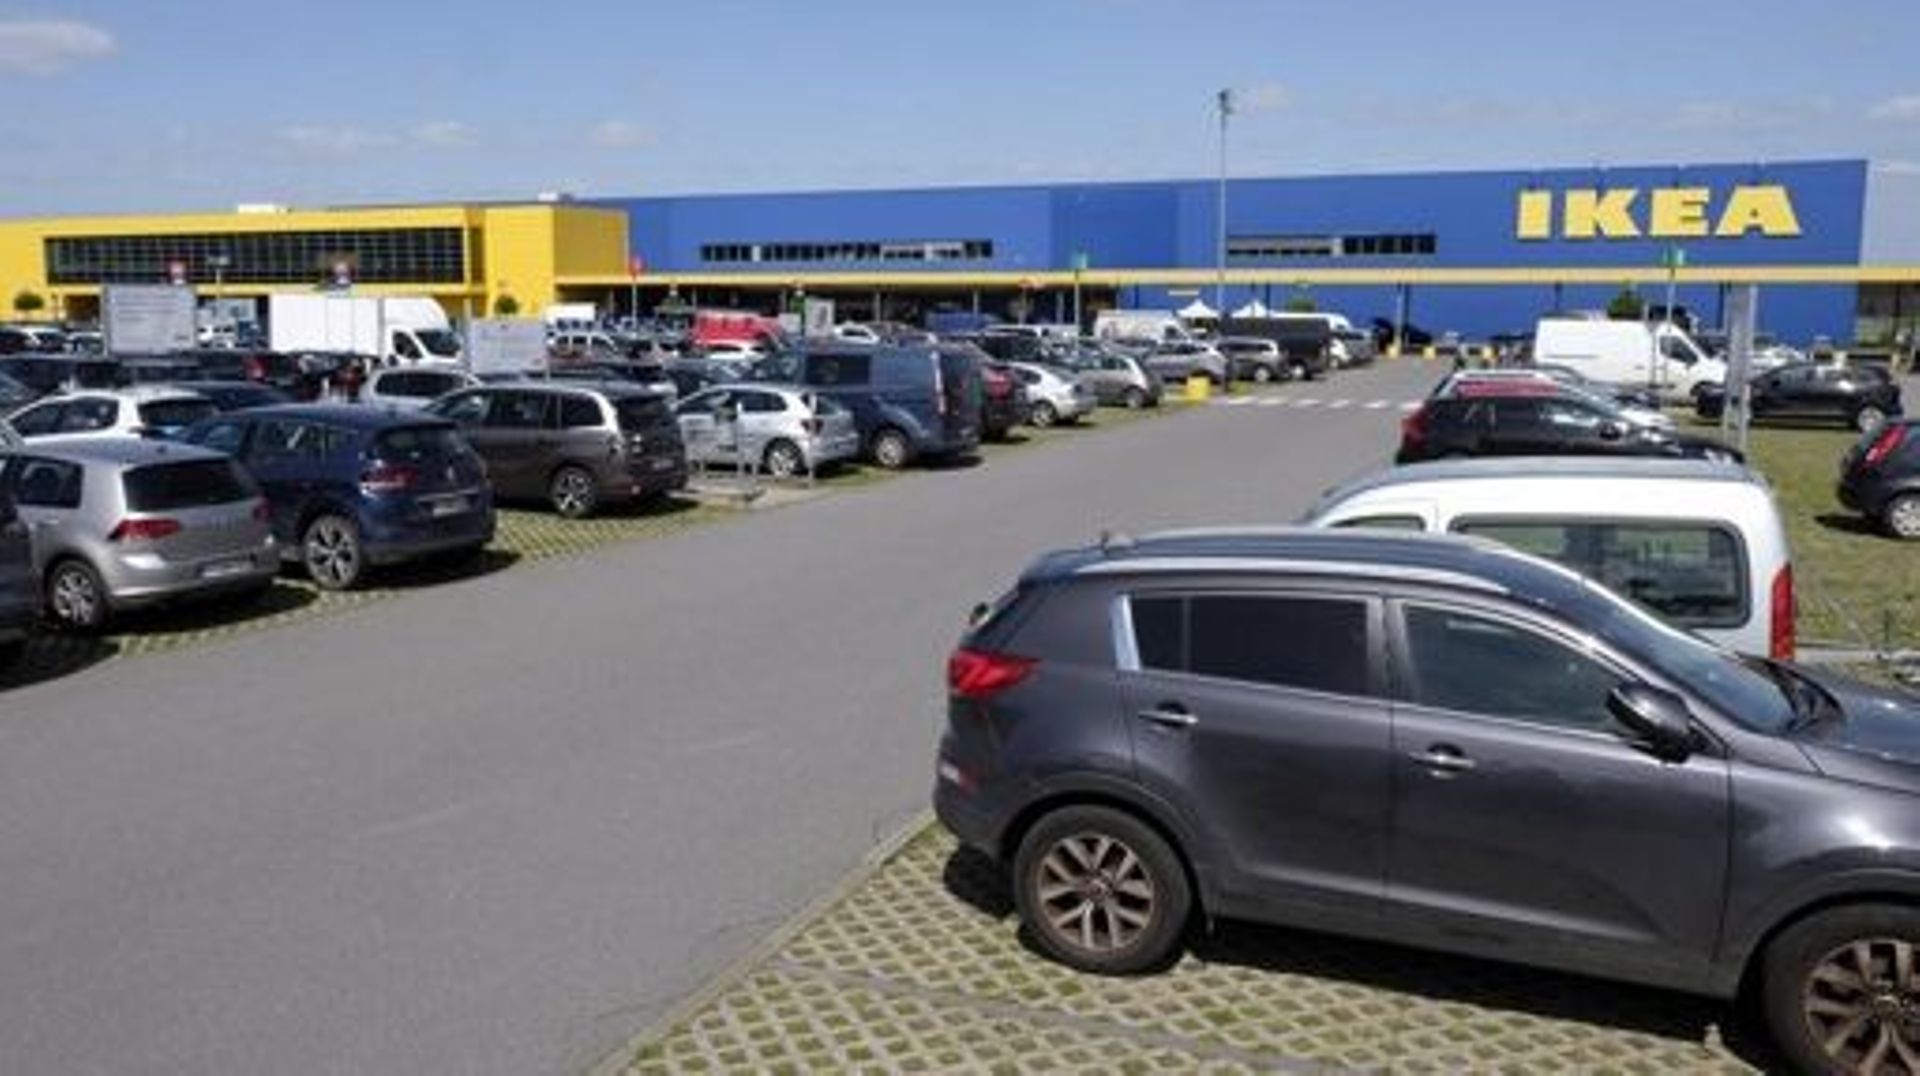 Illustration picture shows lots of cars in the car park of the IKEA Zaventem, Monday 11 May 2020. Belgium goes into its ninth week of confinement. Stage 1B of the deconfinement plan in the ongoing corona virus crisis starts. All shops can reopen and more 